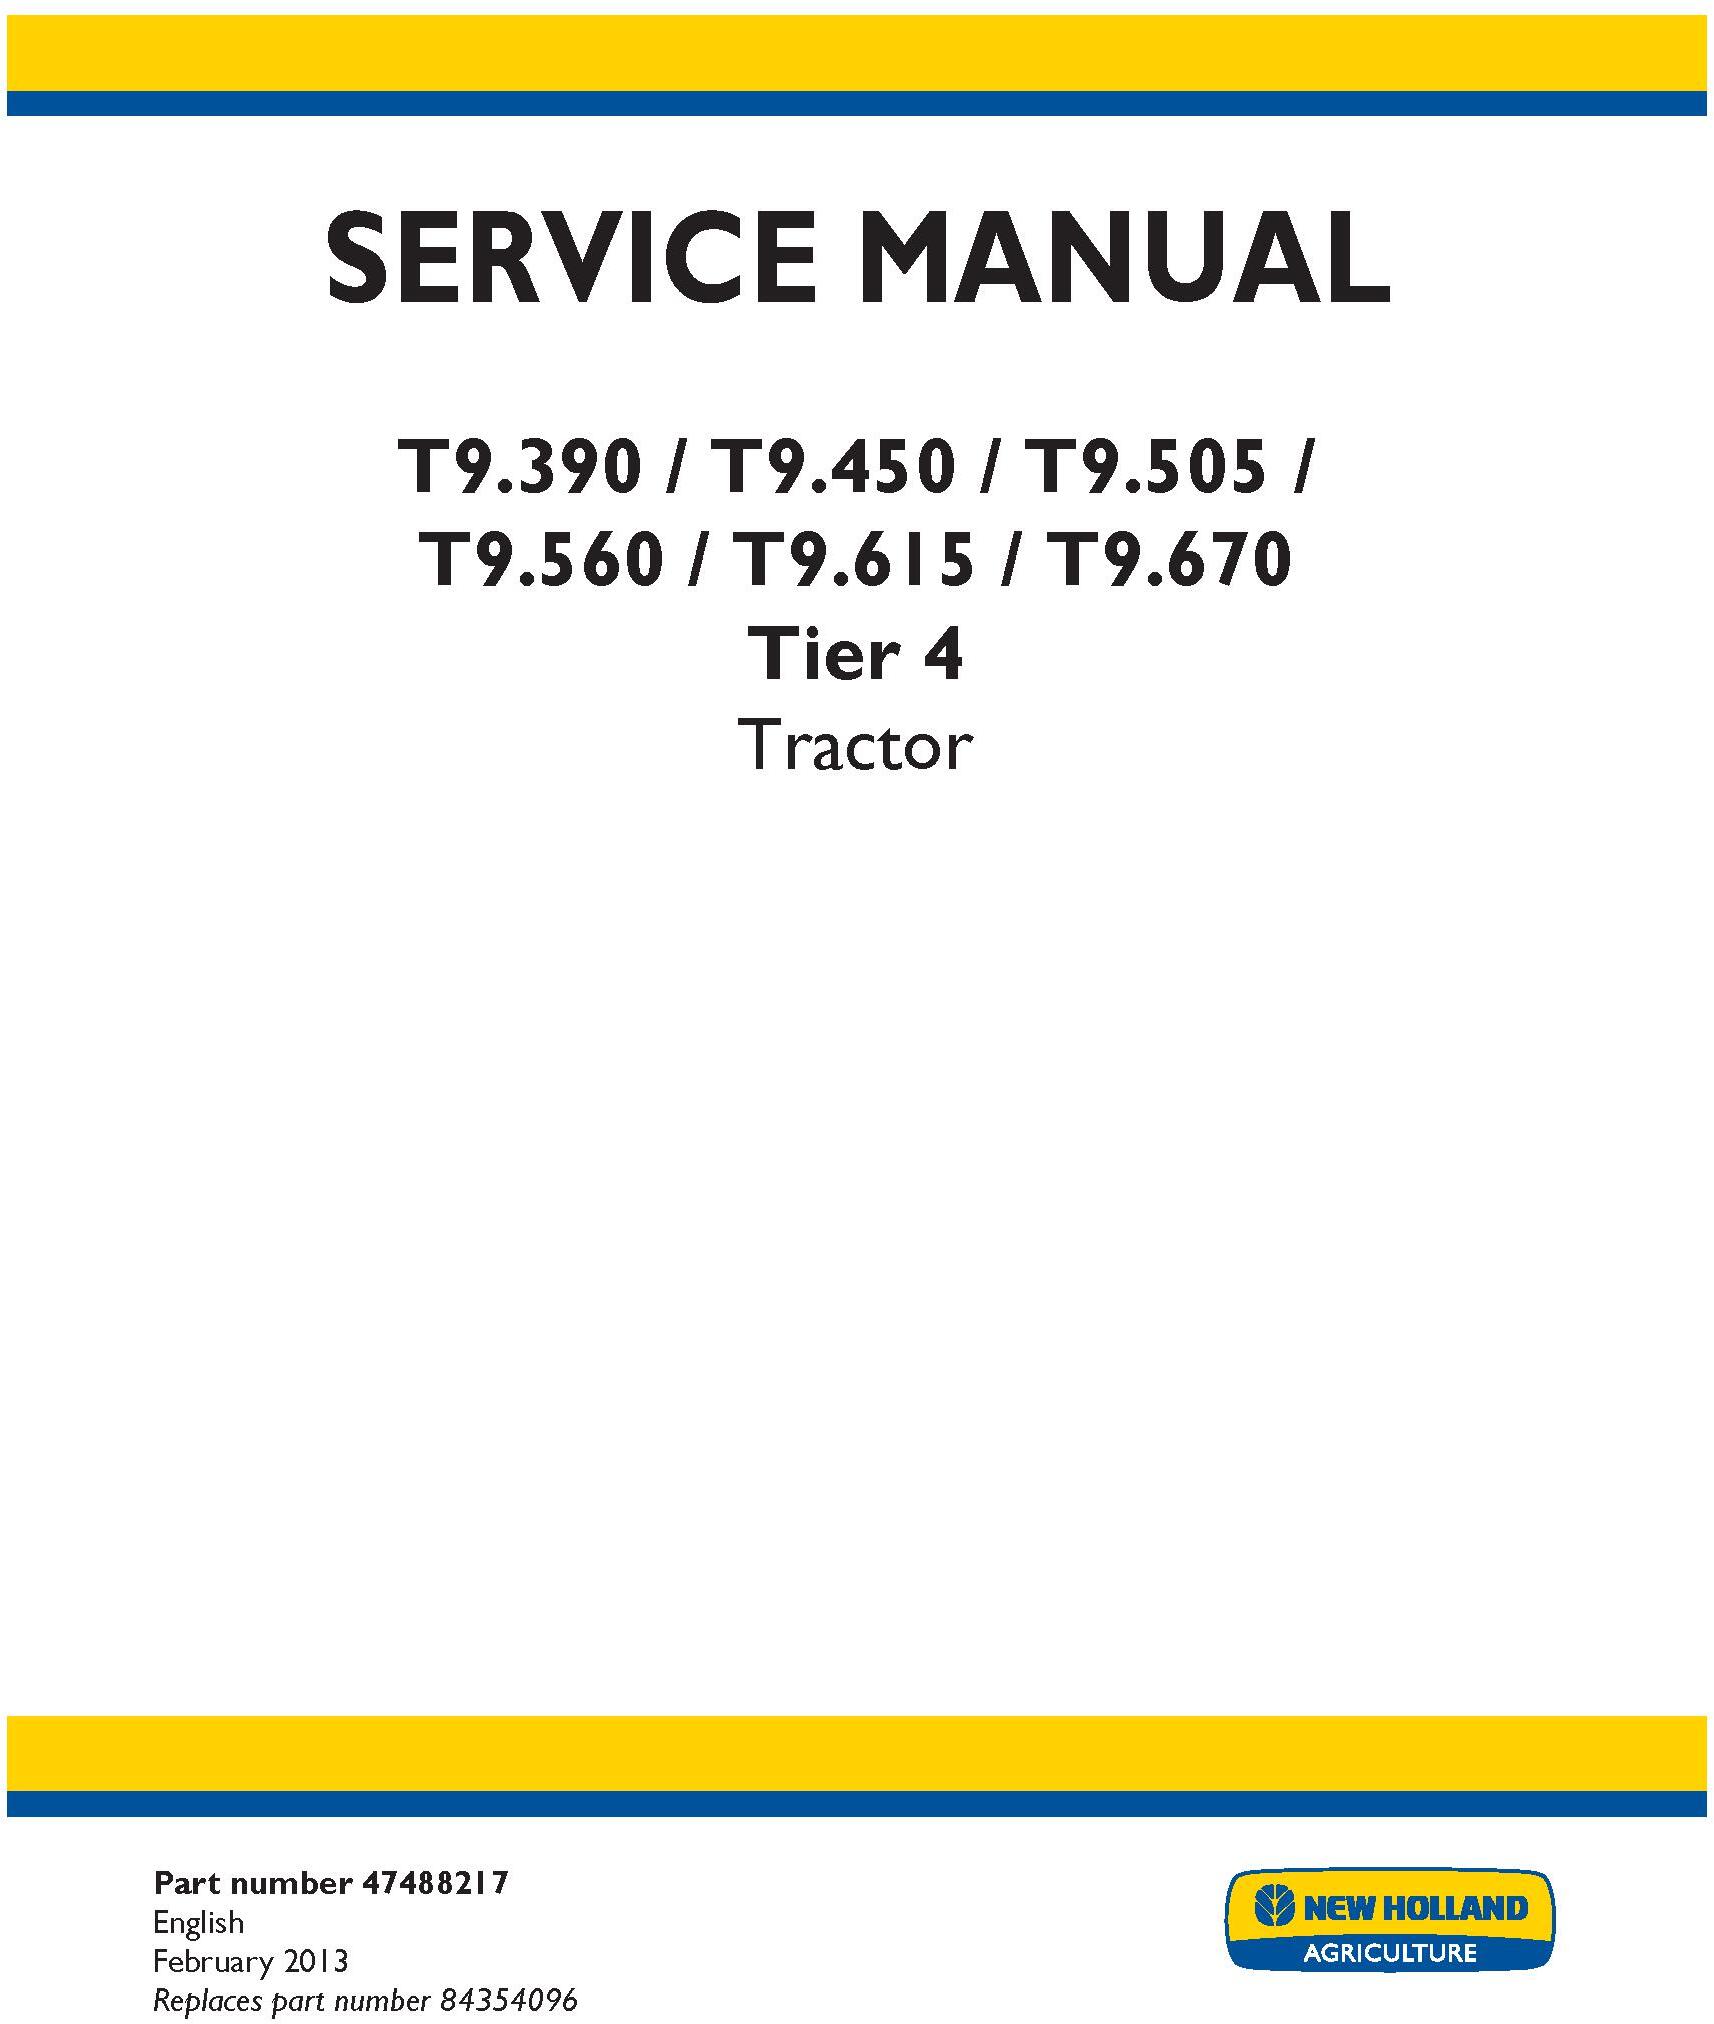 New Holland T9.390, T9.450, T9.505, T9.560, T9.615, T9.670 Tier 4 Tractor Service Manual